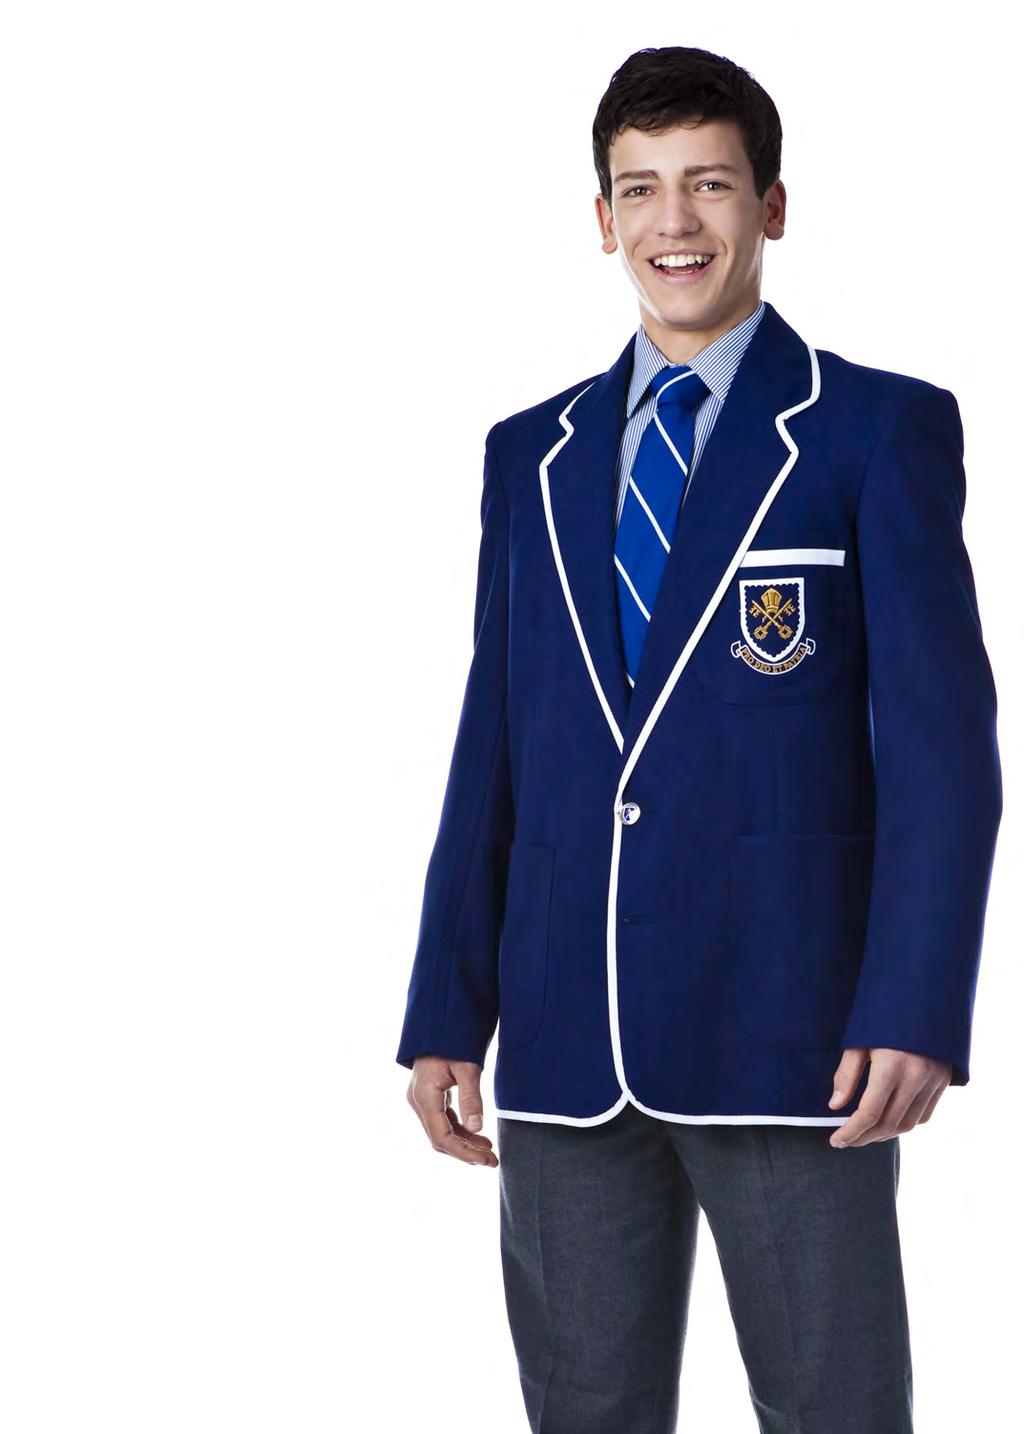 Senior School Blazer Uniform Senior School Prefect Uniform The main School preferred uniform is the Blazer uniform. It is compulsory in Terms 2 and 3 and at formal occasions such as Speech Day.